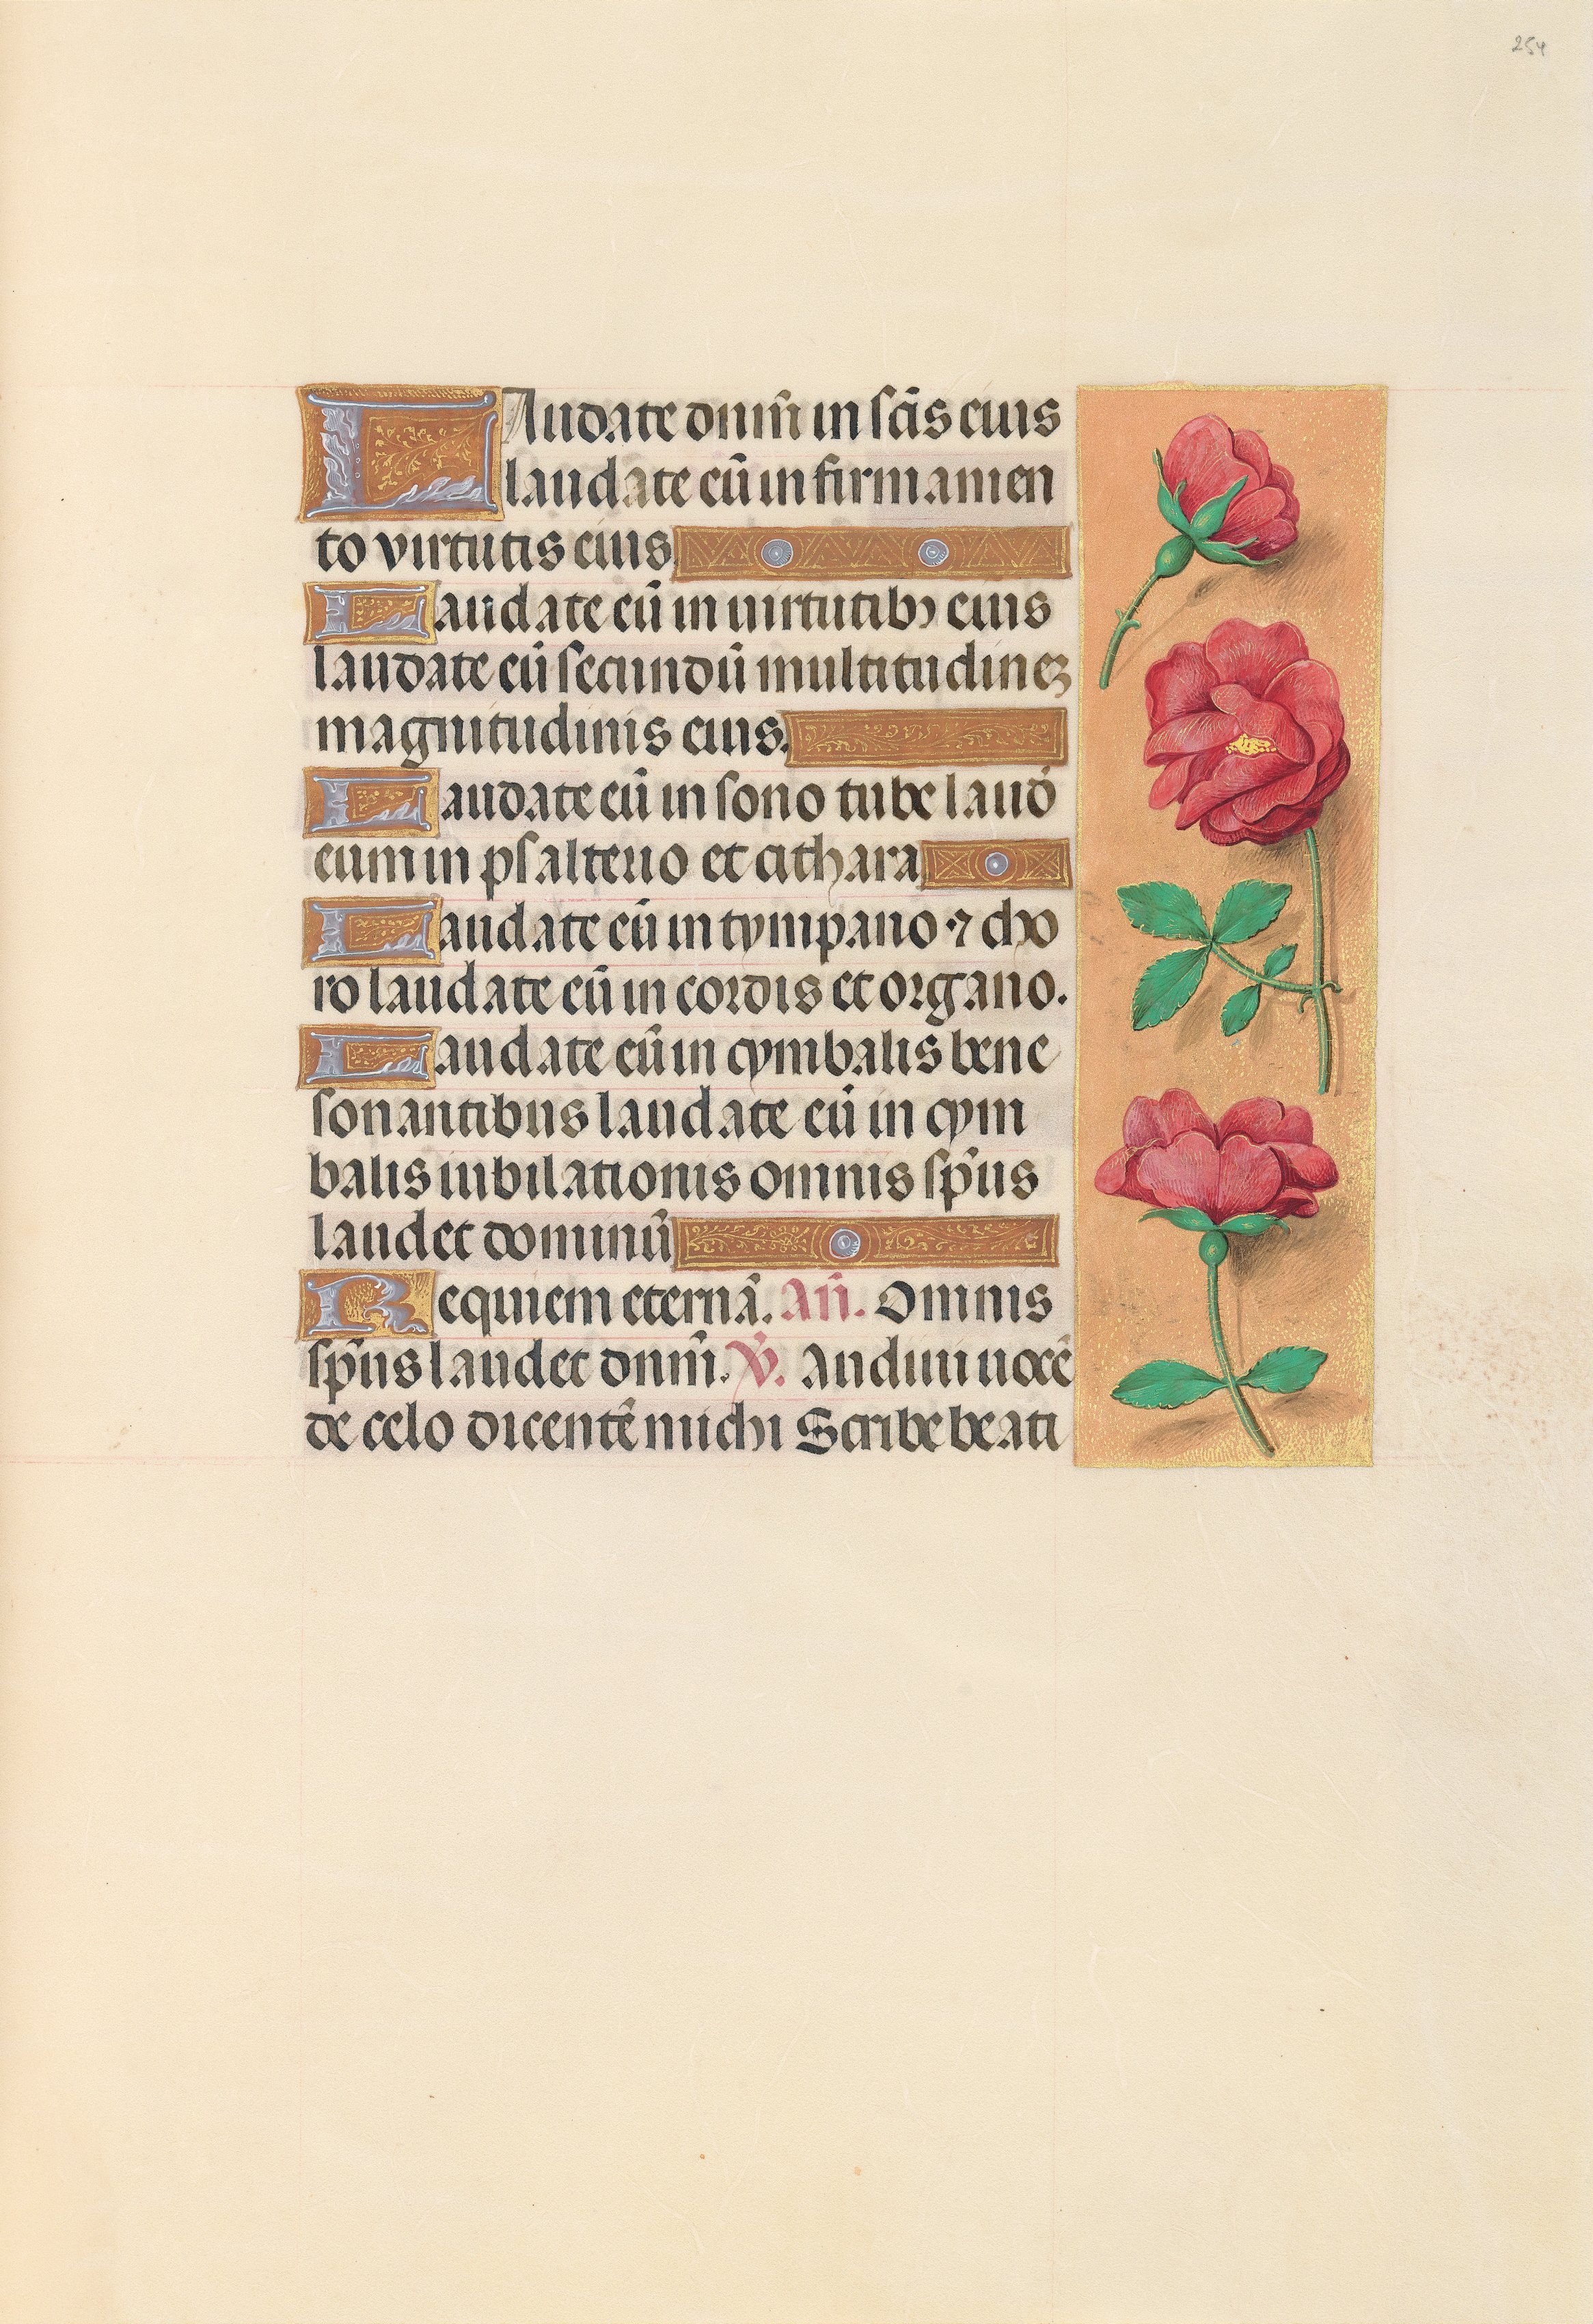 Hours of Queen Isabella the Catholic, Queen of Spain:  Fol. 254r